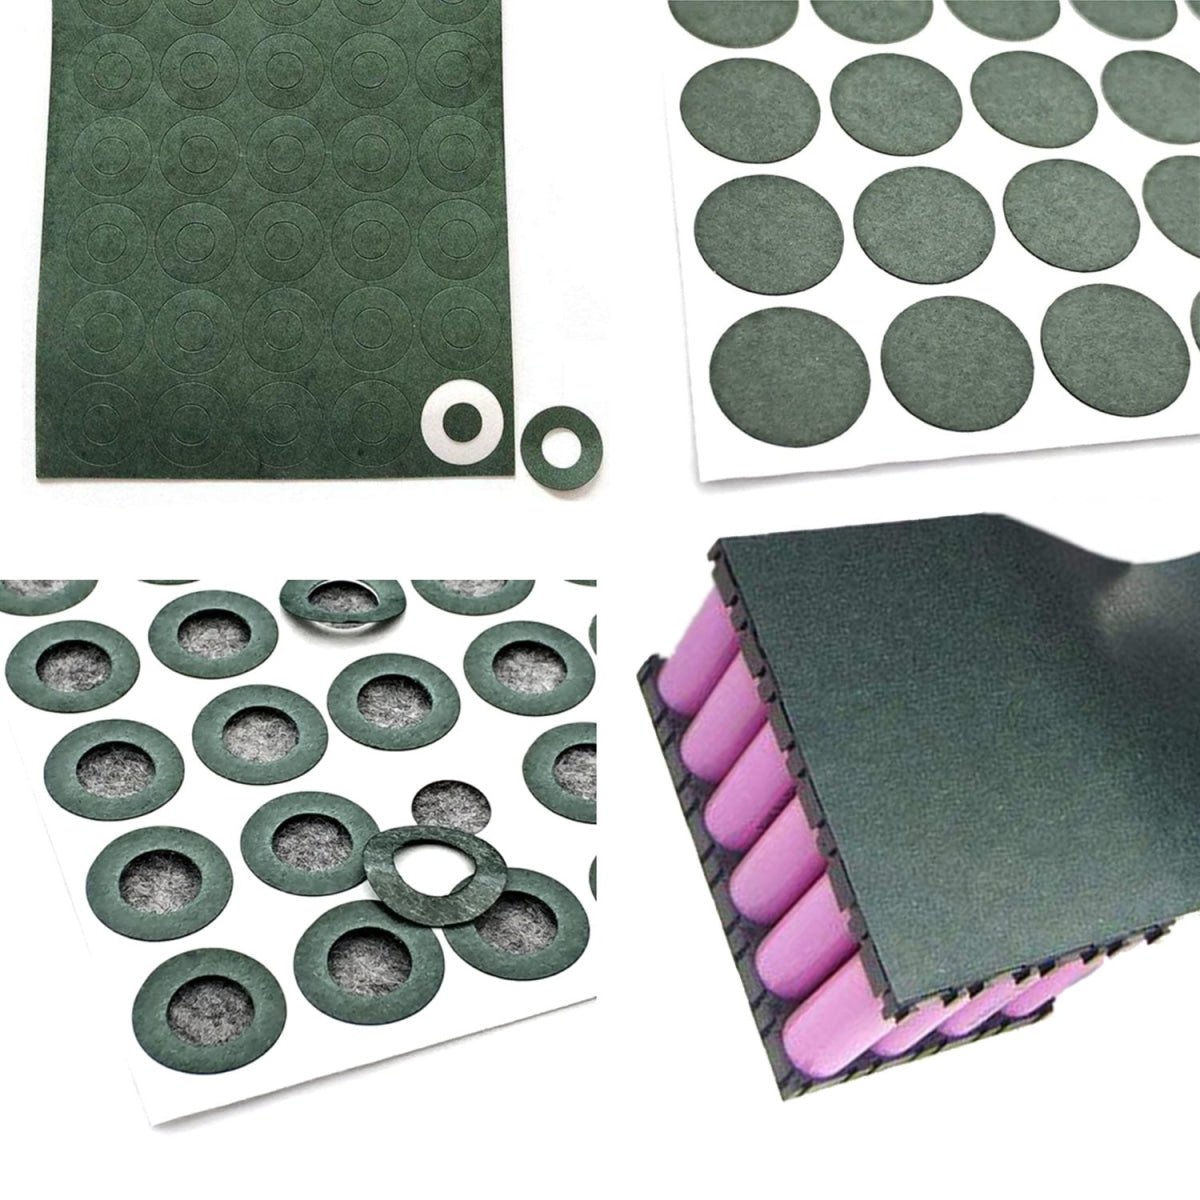 1m/100/108pcs 18650 1S Barley Paper Li-ion Battery Insulation Gasket for Battery Pack Pad - 100 circle outlines - - Asia Sell